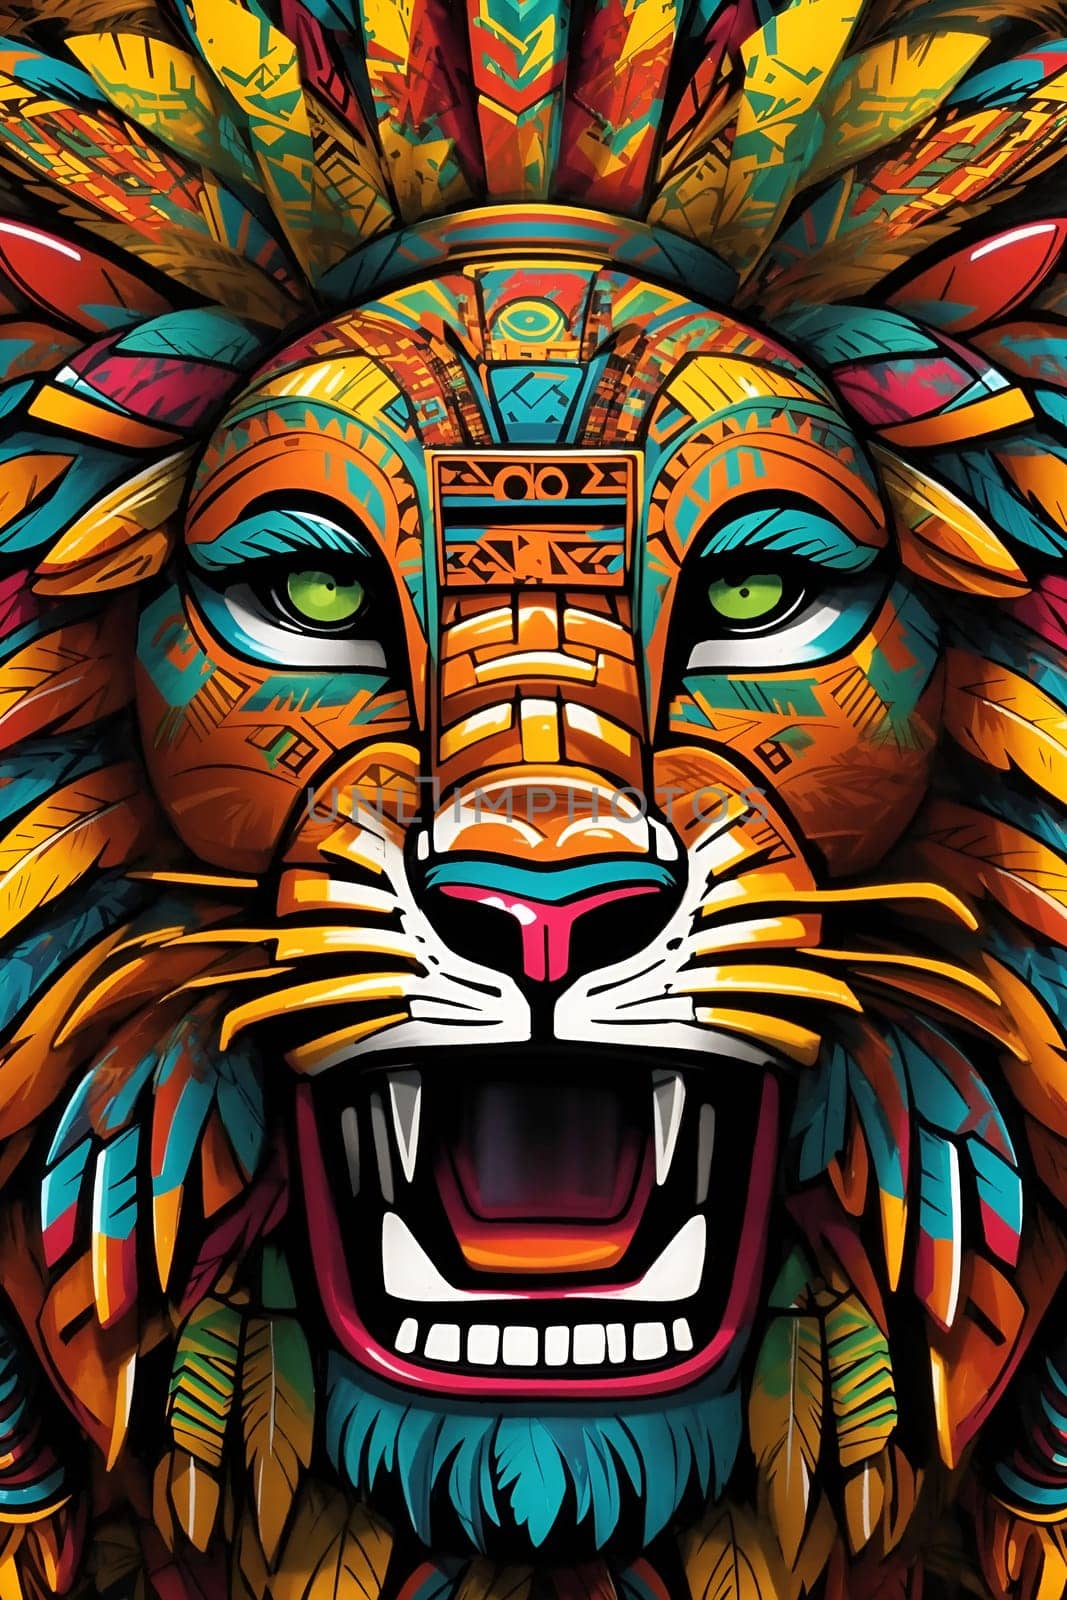 A lion, with vibrant colors on its face, bares its teeth with its mouth wide open.